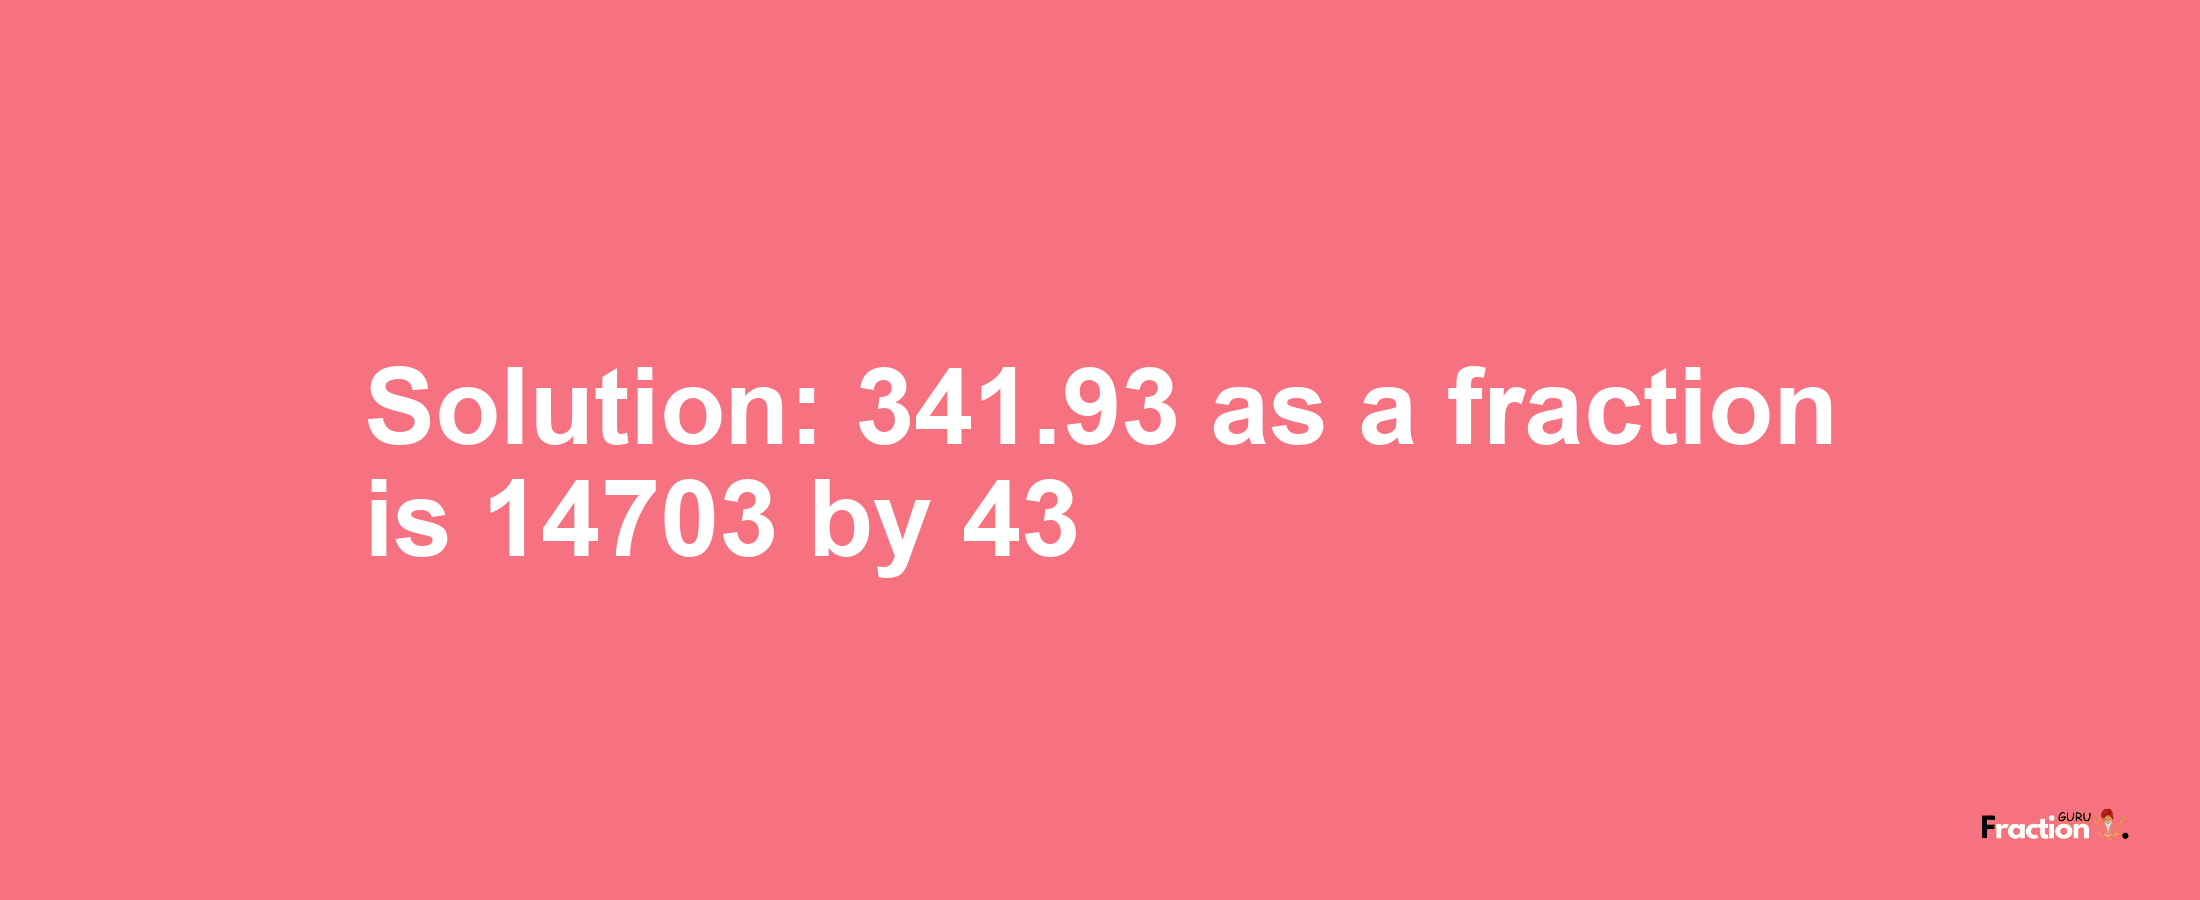 Solution:341.93 as a fraction is 14703/43